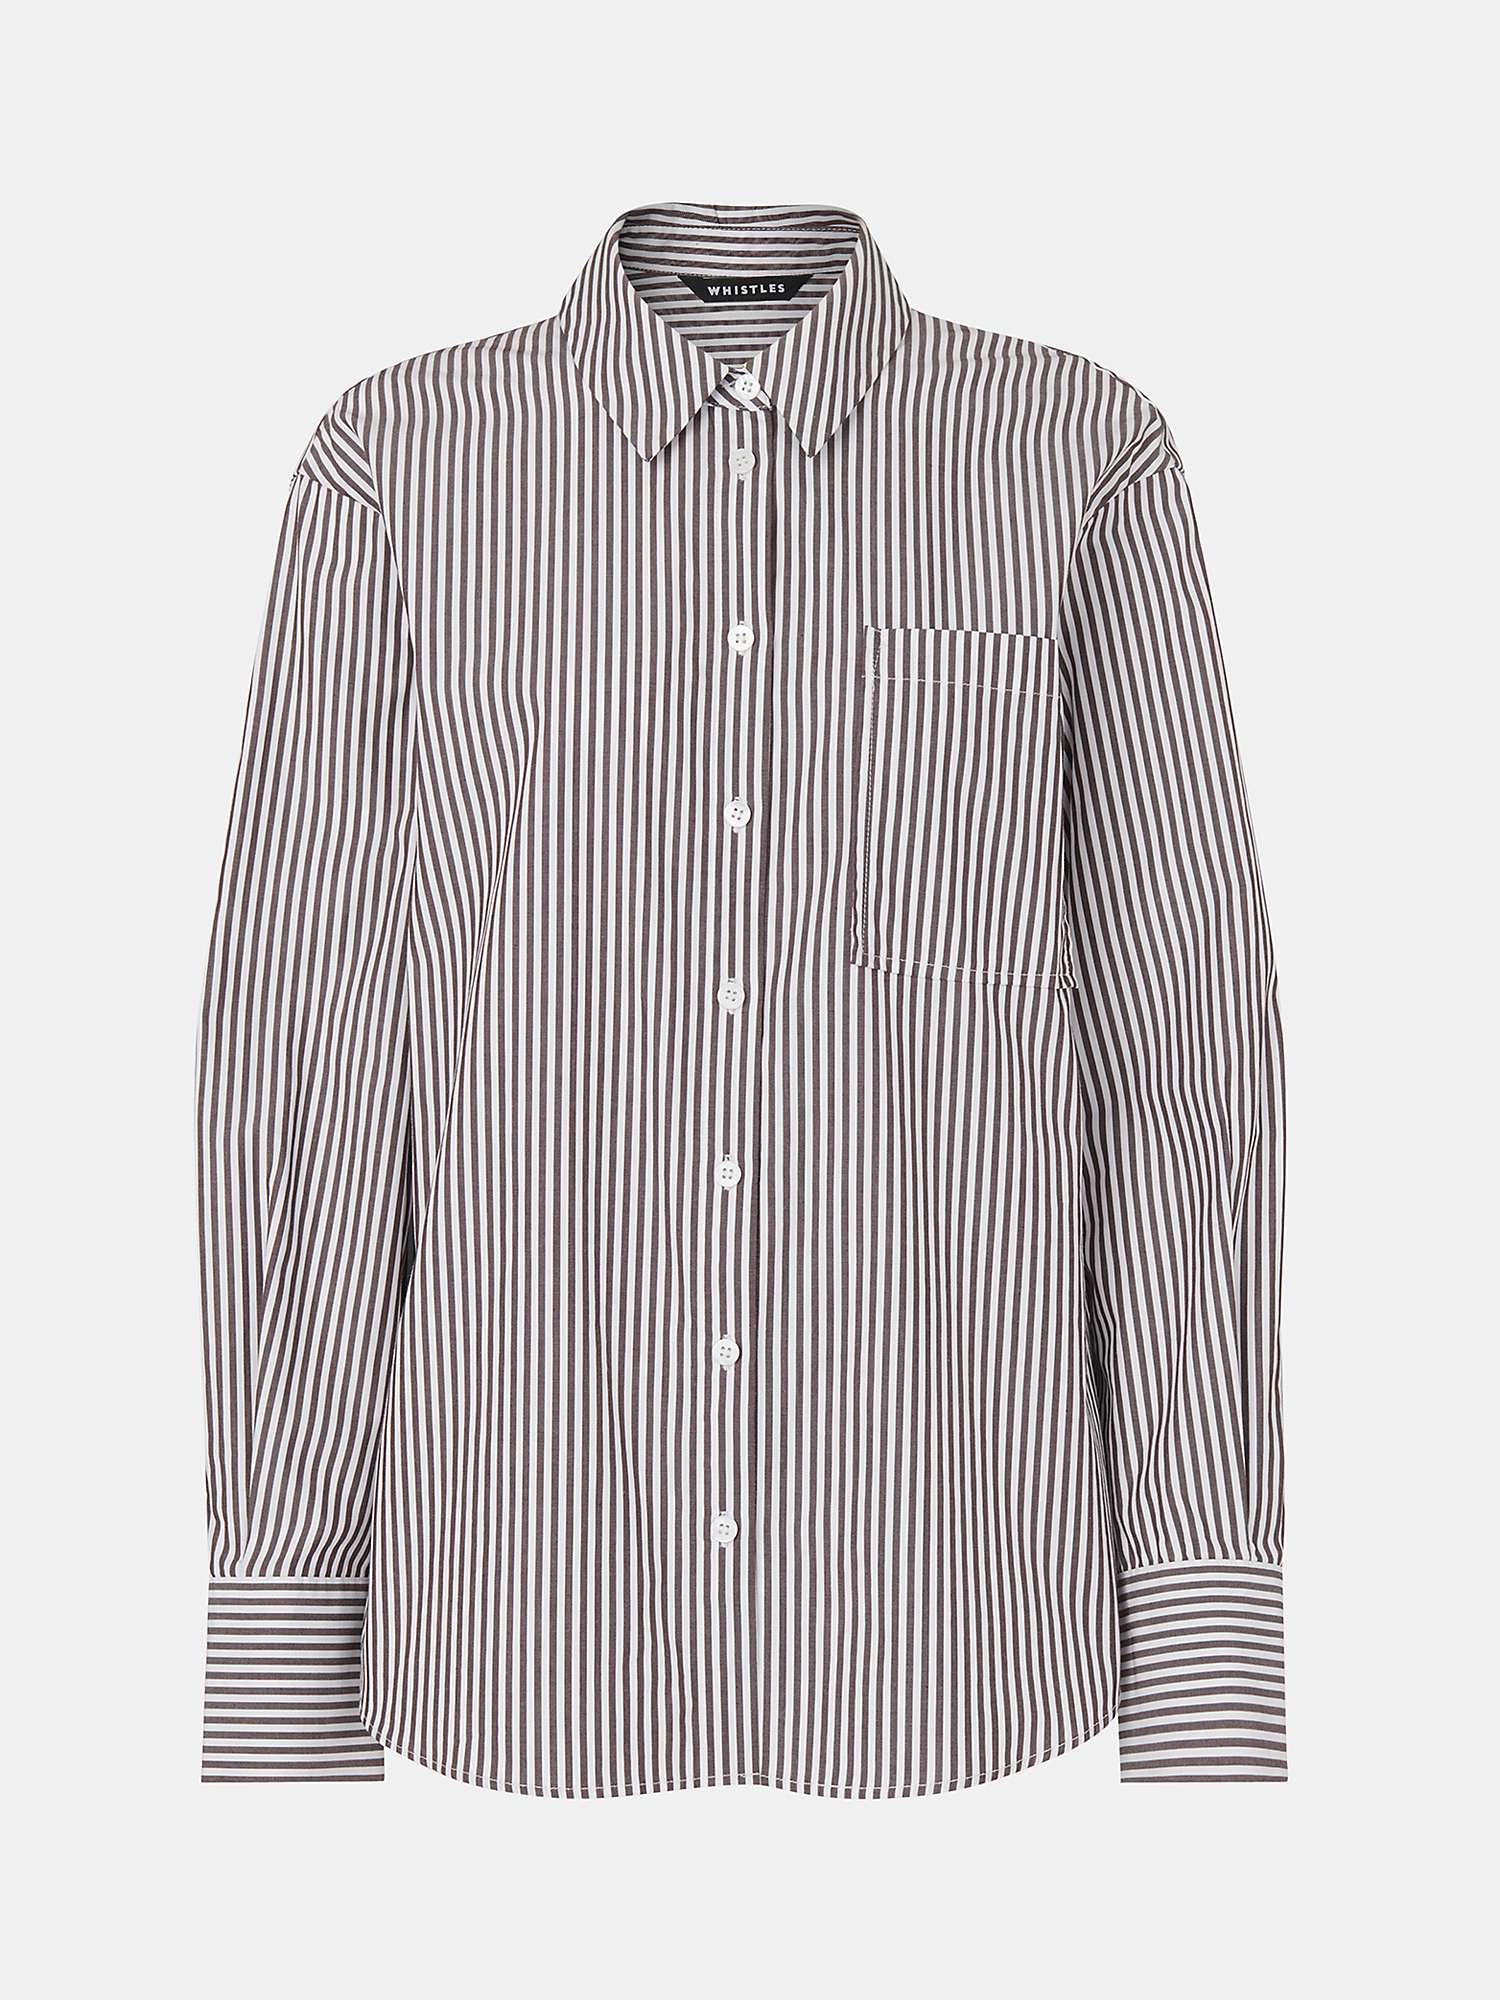 Buy Whistles Striped Relaxed Fit Shirt, Black/White Online at johnlewis.com